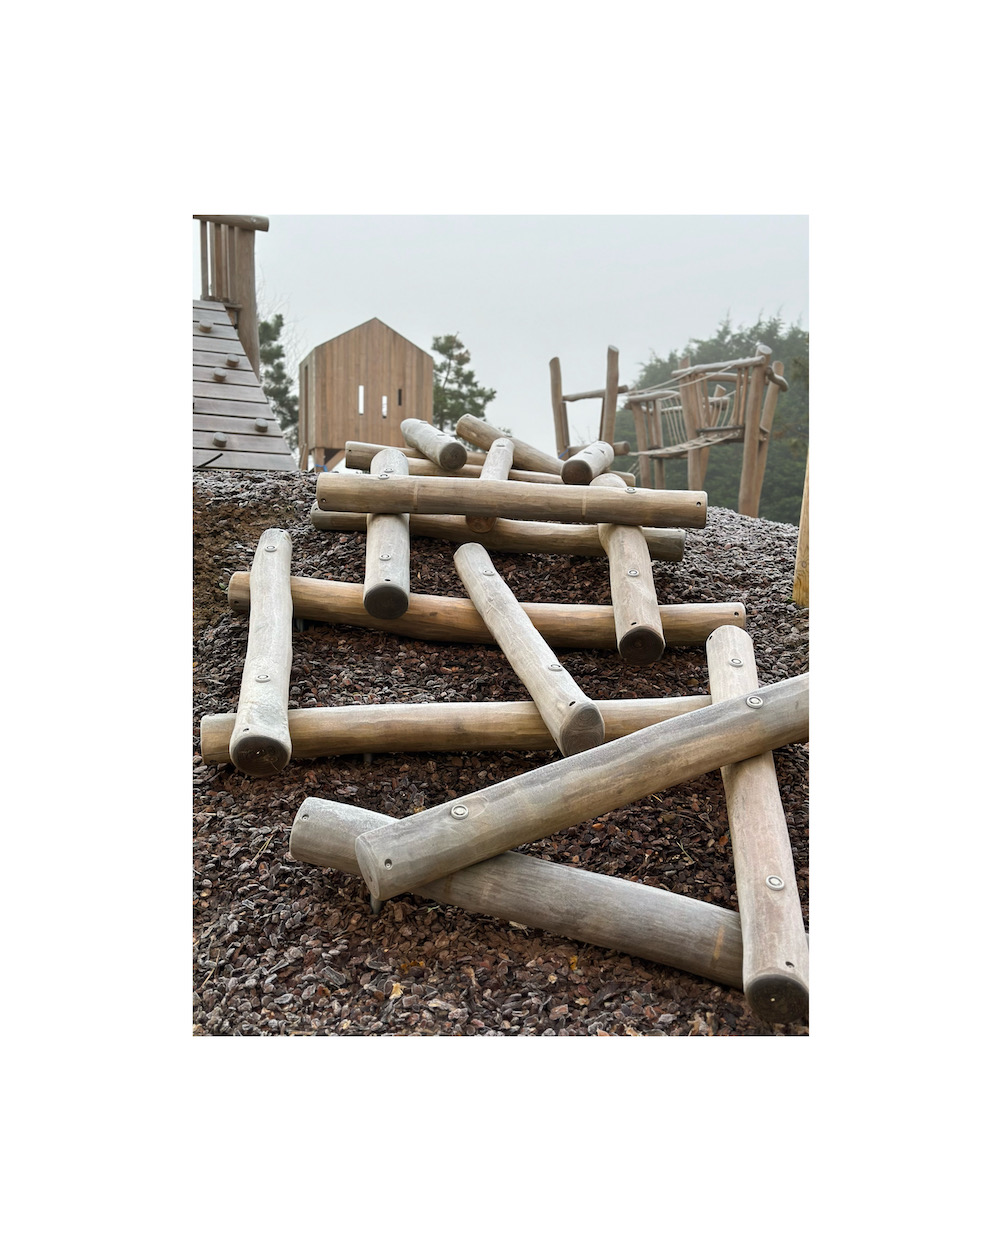 Frosty morning log scramble play equipment in Cotswold Playscape designed and installed by HC 